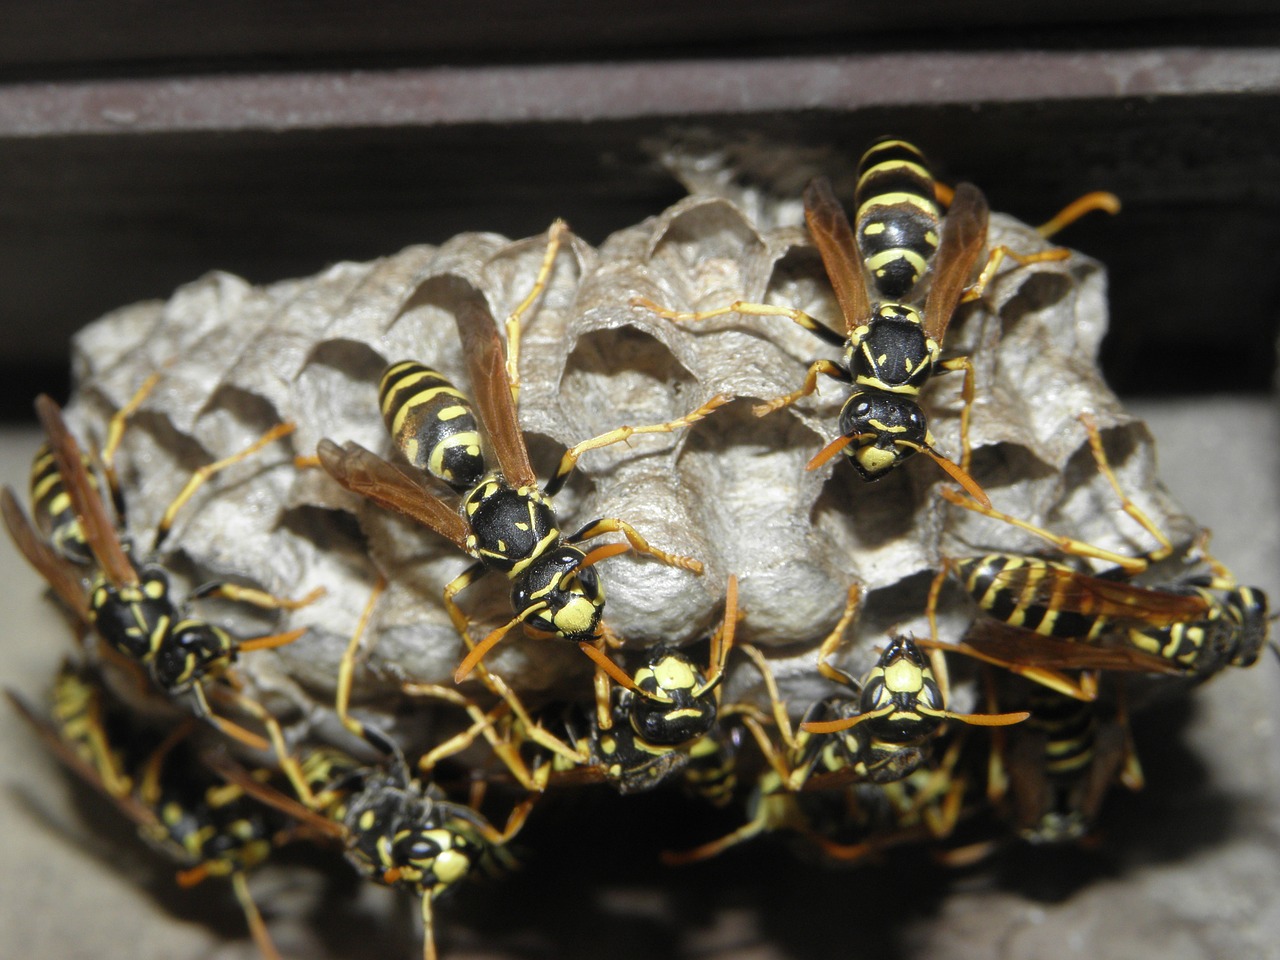 wasps insects nature free photo